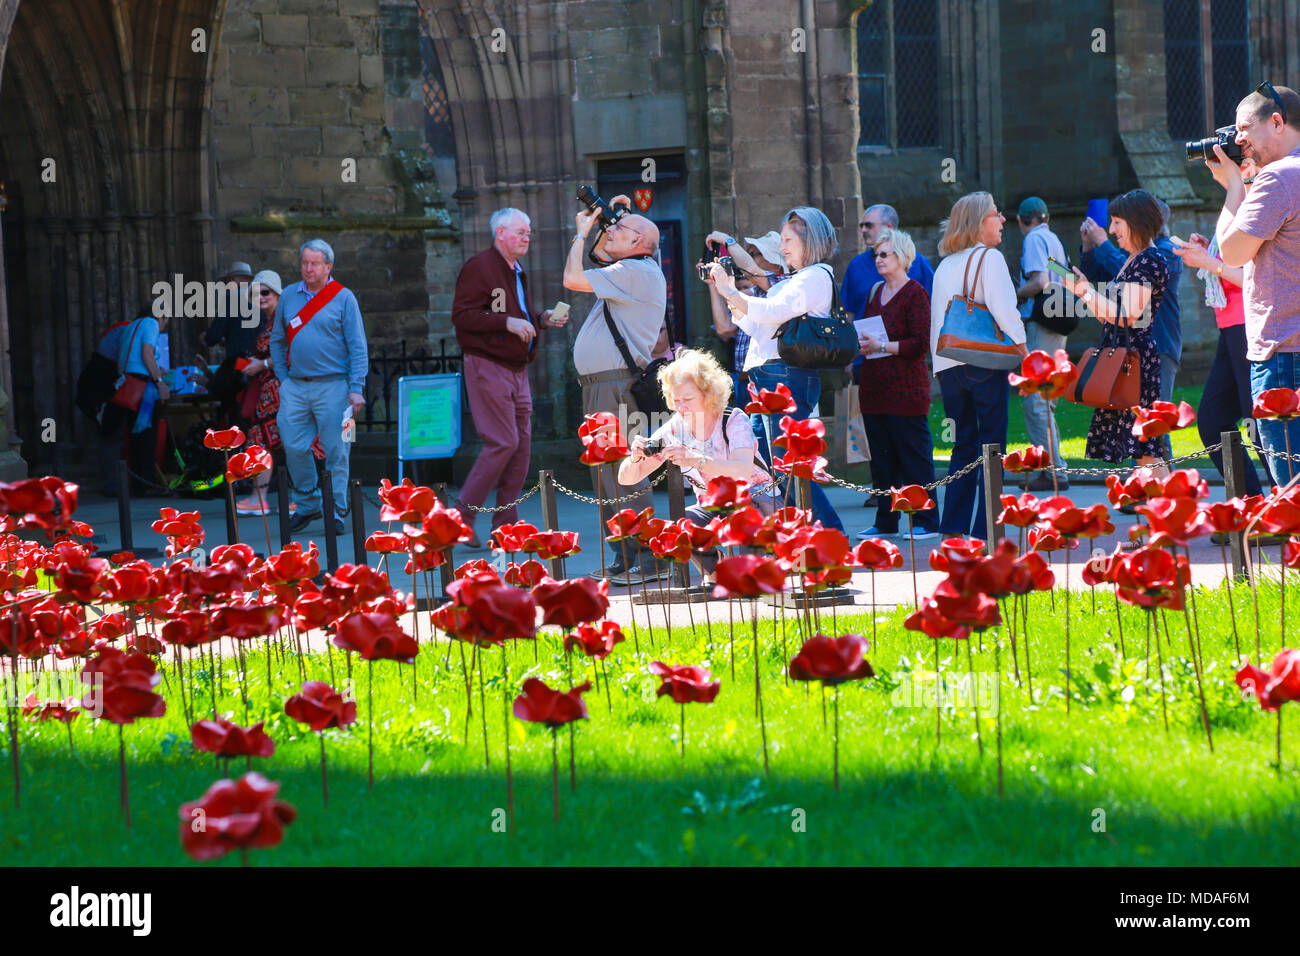 Visitors to the Weeping Window sculpture of poppies at Hereford cathedral UK Stock Photo